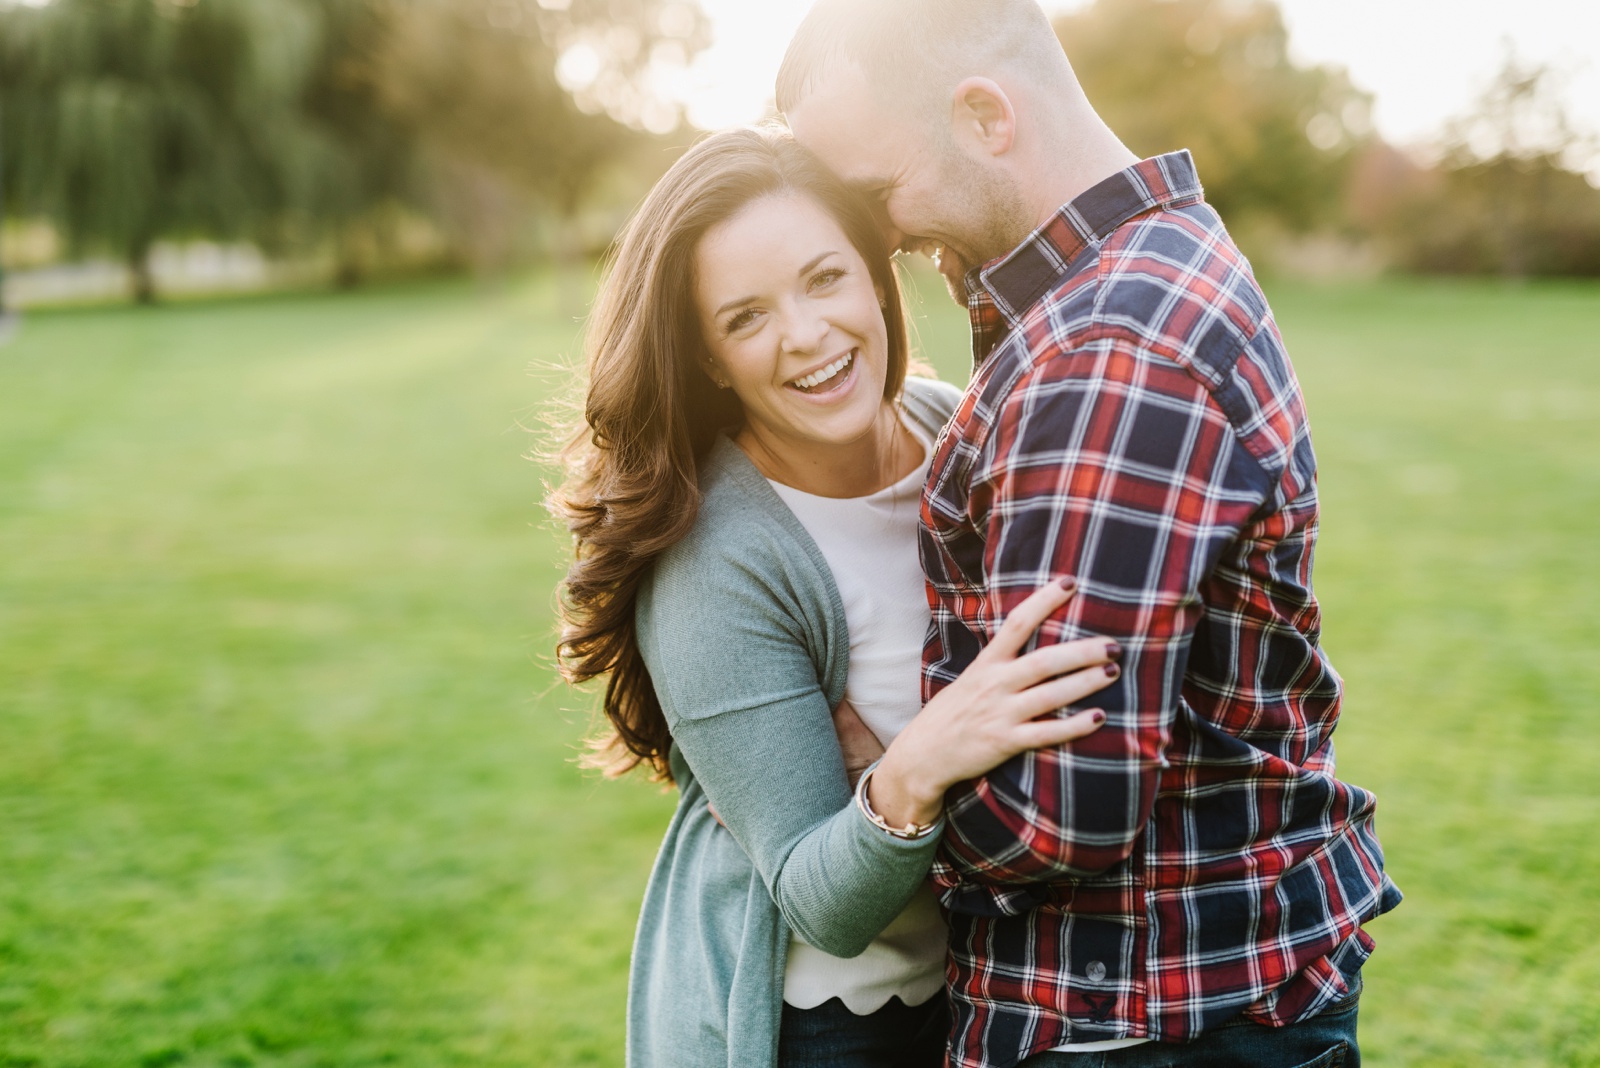 Autumn Engagement Session at North Point Park in Boston, Massachusetts by Boston Wedding Photographer Annmarie Swift